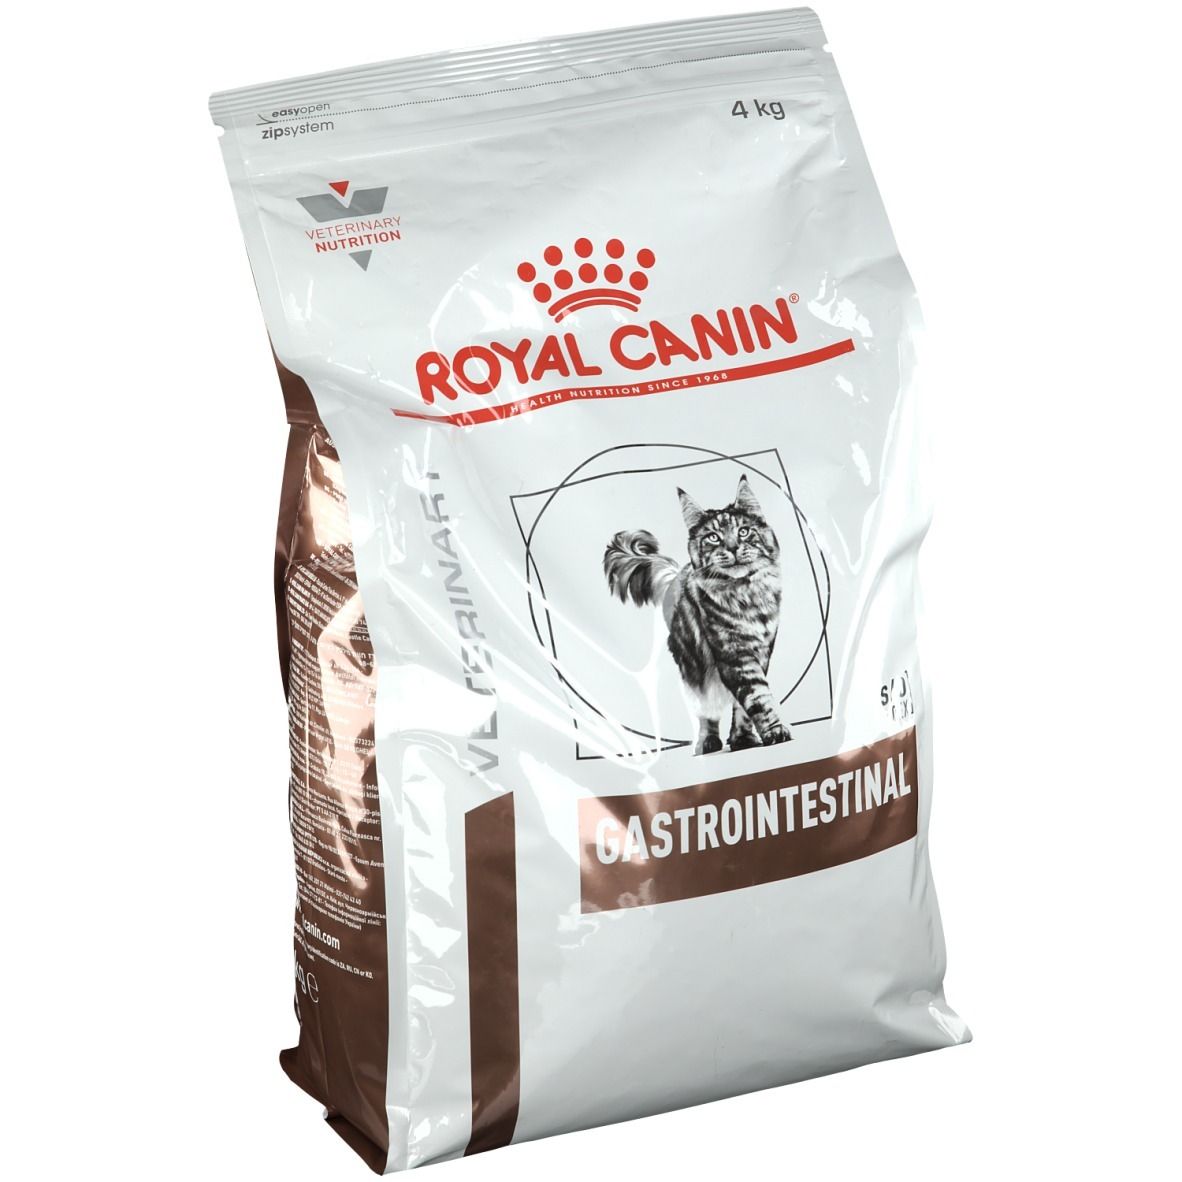 ROYAL CANIN® GASTOINTESTINAL Aliments pour chats